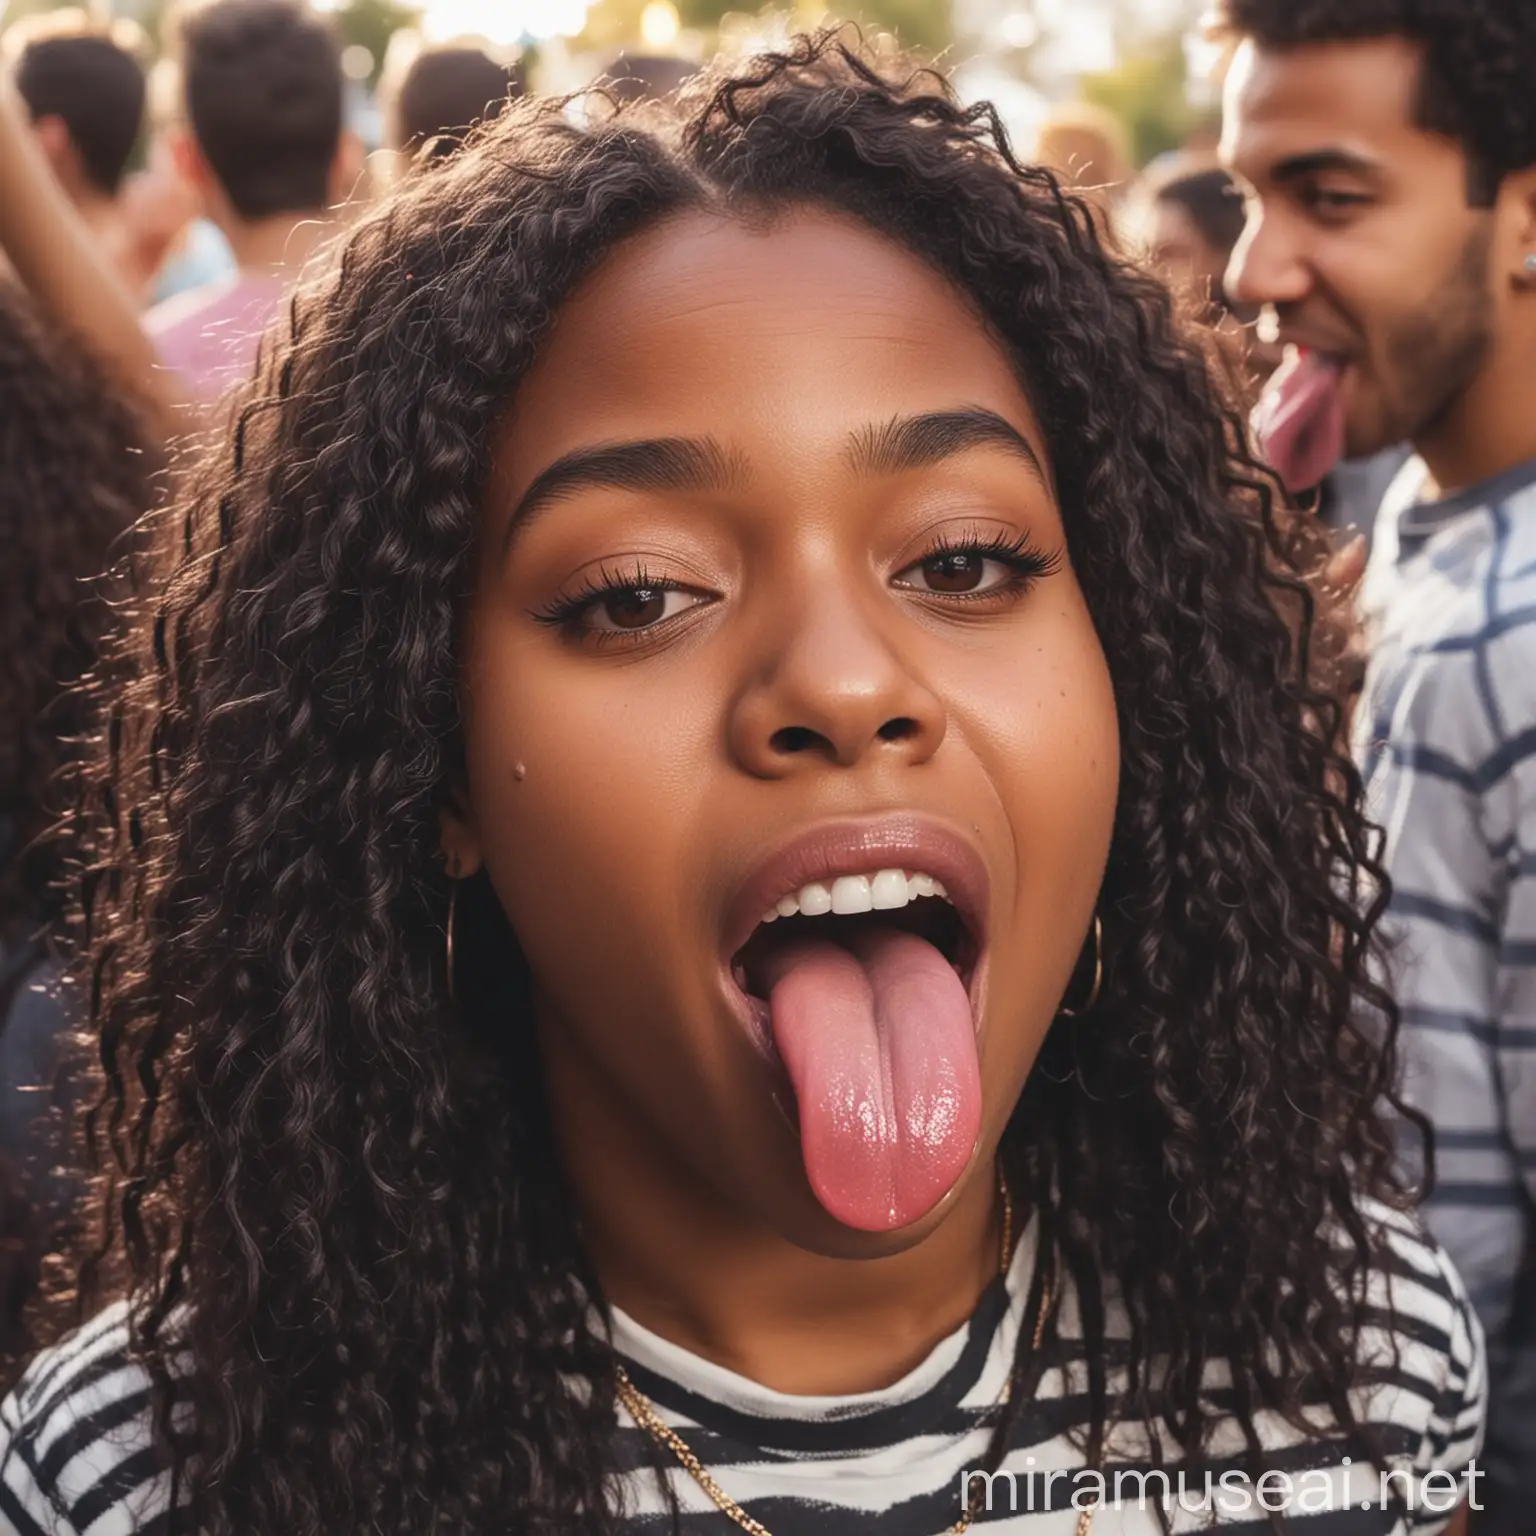 Playful Black Girl Sticking Her Tongue Out at Party